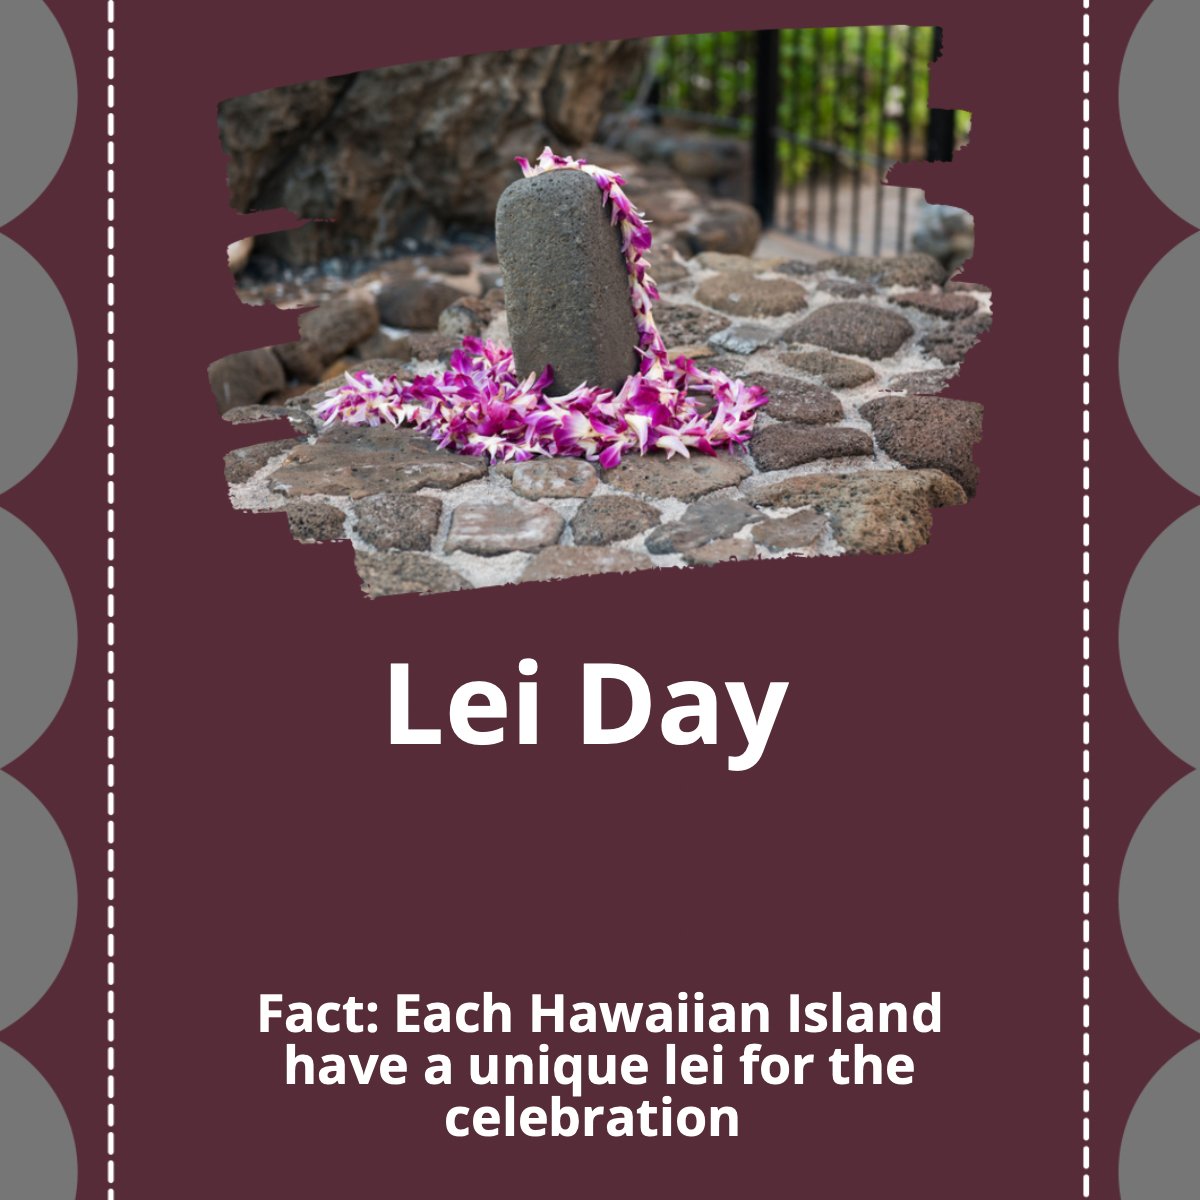 Happy Lei Day to all who celebrate 🙌! 🤔 Did you know? Each Hawaiian island has a unique lei for the celebration. #lei #day #hawaii #flowers #celebration #grey